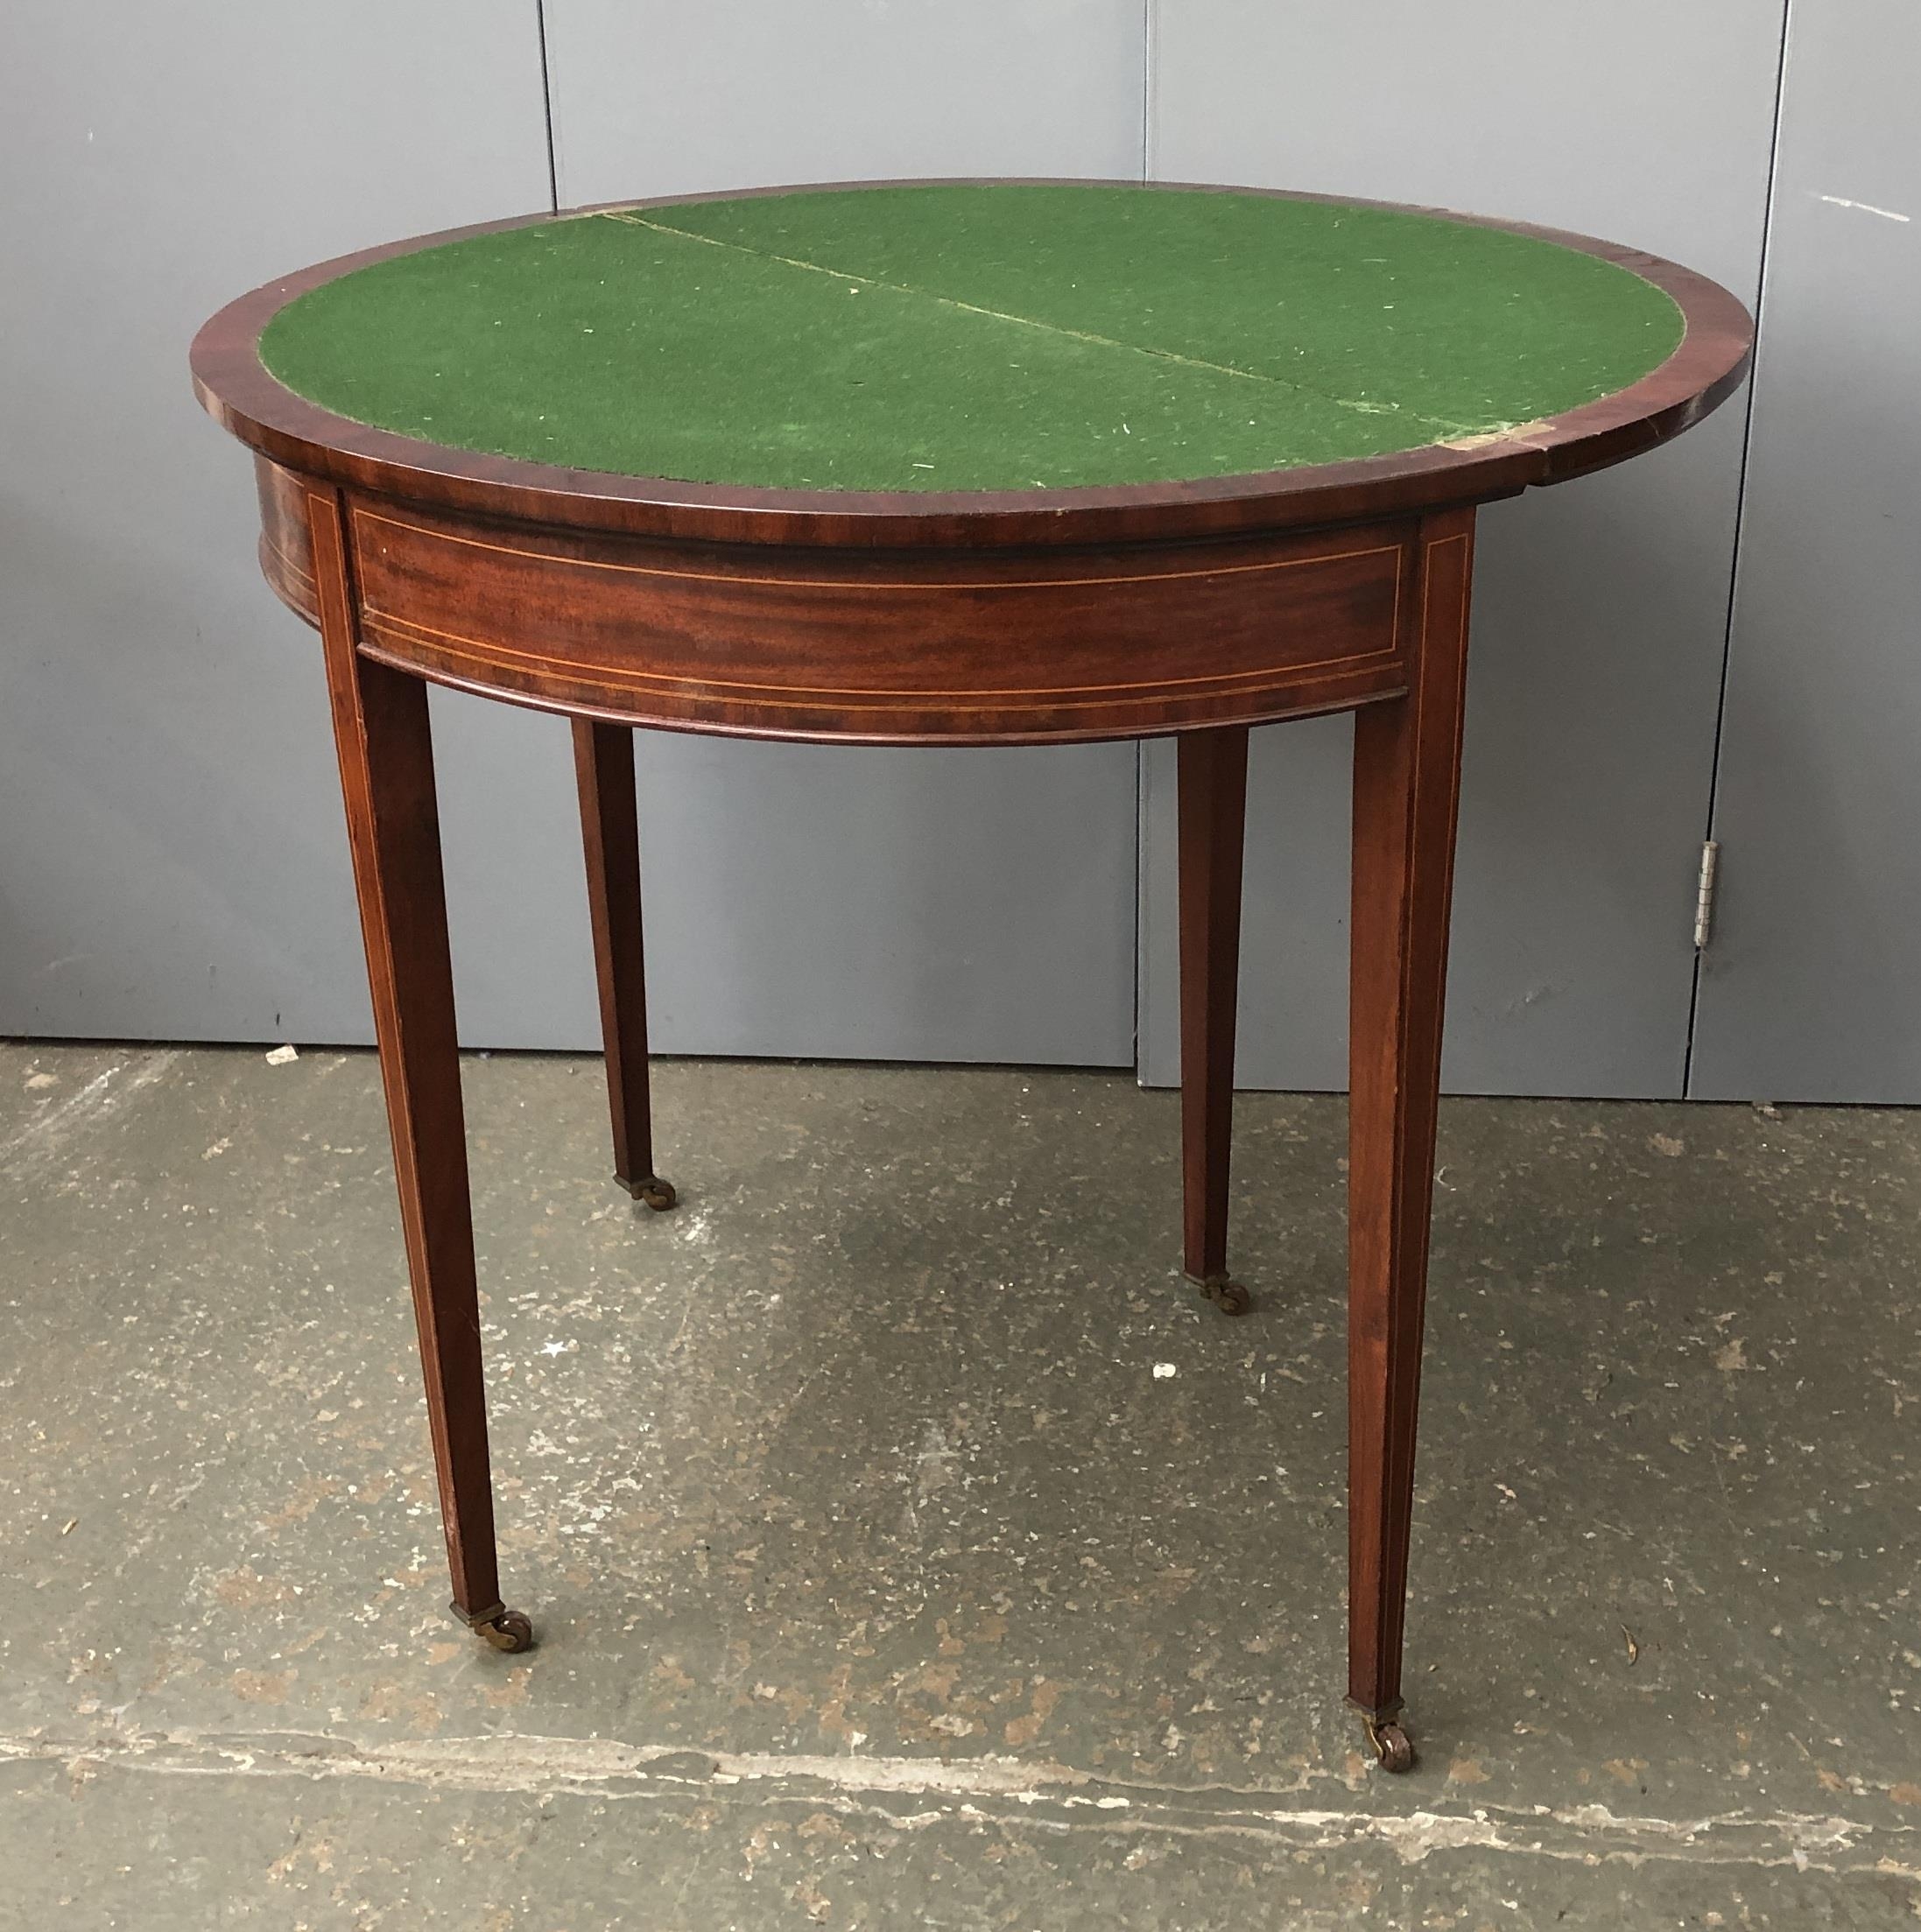 A 19th century demilune card table, on square tapered legs with casters, 84x42x74cmH - Image 2 of 2